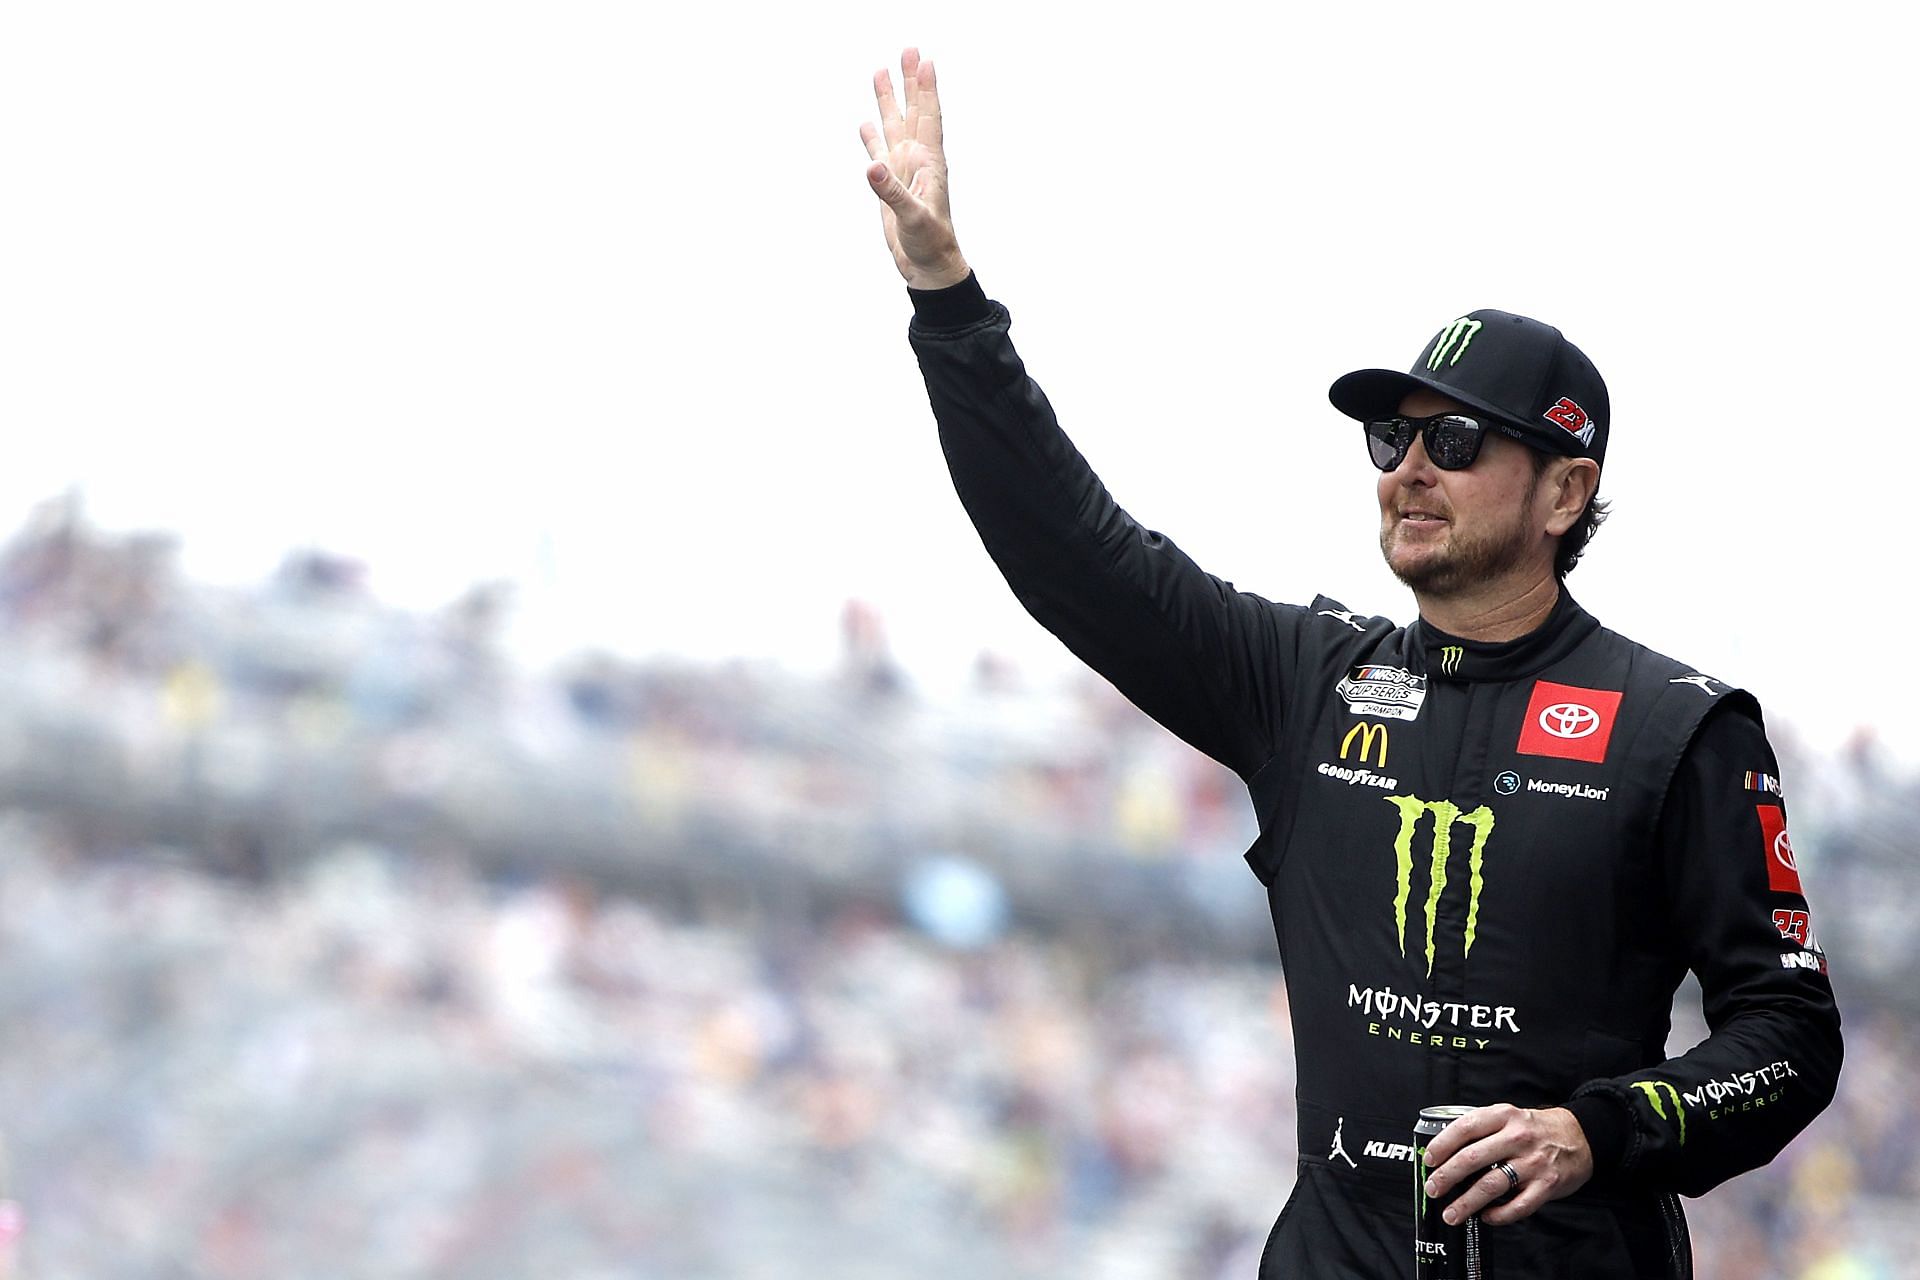 Kurt Busch waves to fans during the driver intros before the NASCAR Cup Series DuraMAX Drydene 400 presented by RelaDyne at Dover Motor Speedway